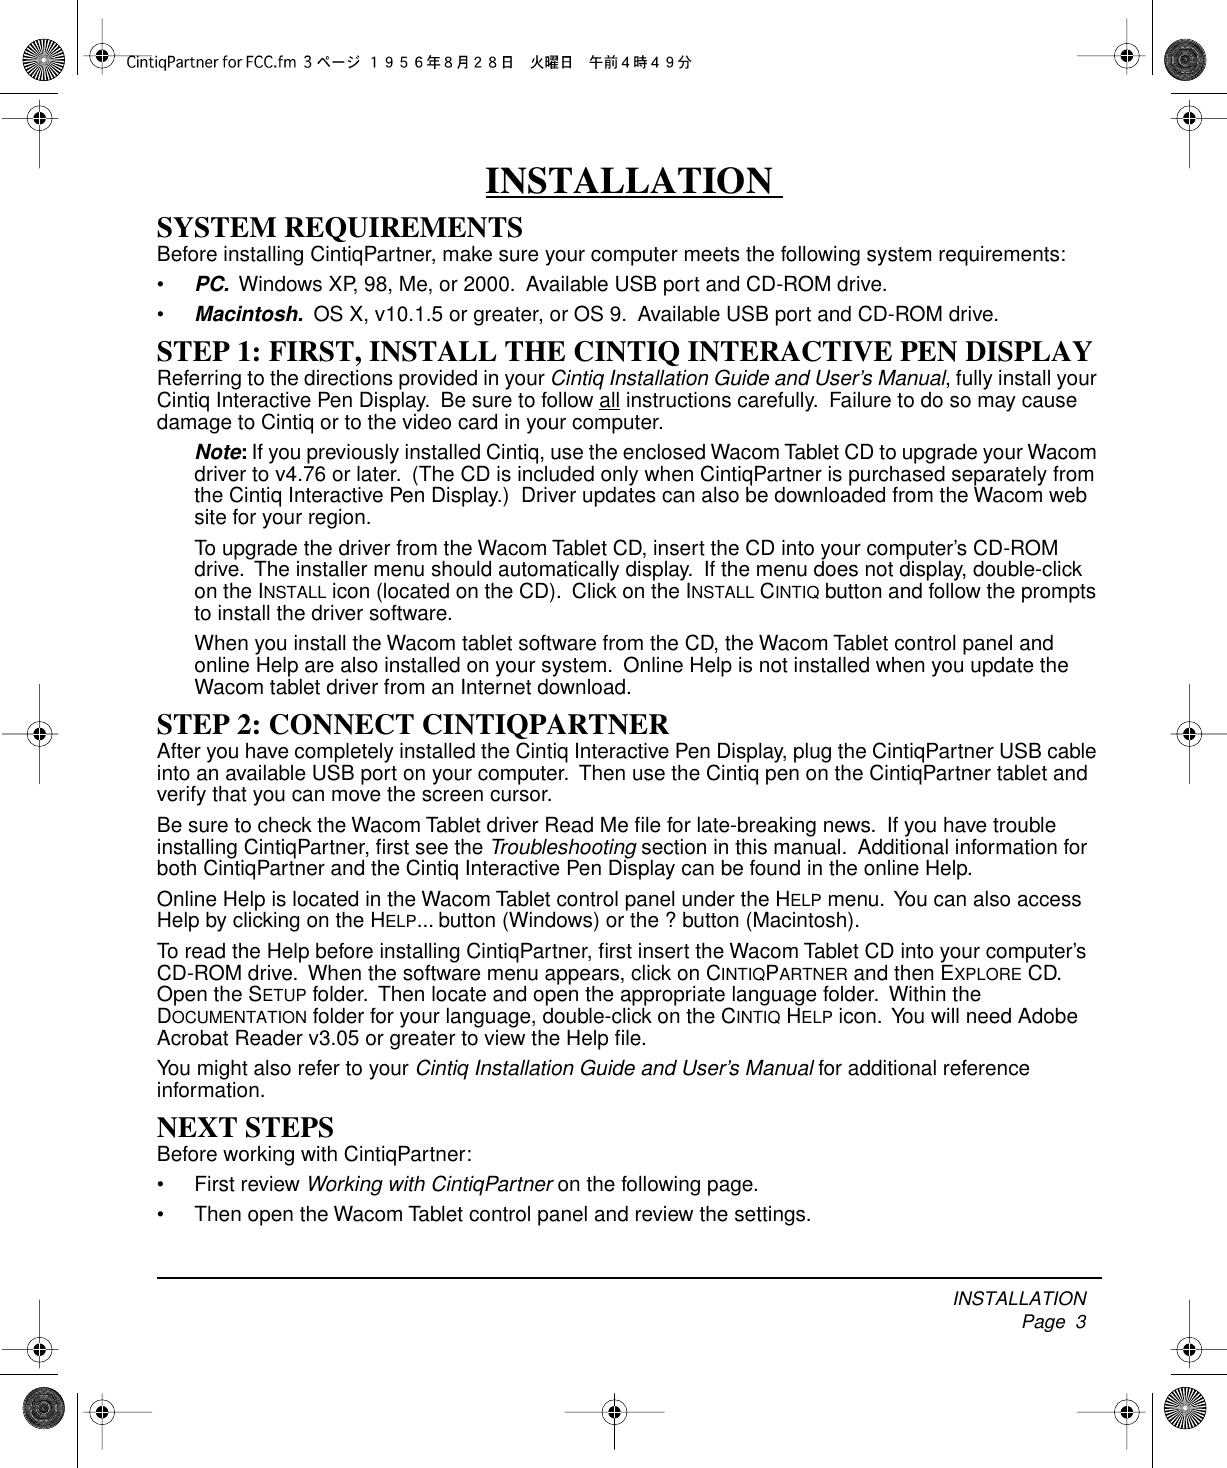  INSTALLATION     Page  3 INSTALLATION  SYSTEM REQUIREMENTS Before installing CintiqPartner, make sure your computer meets the following system requirements:• PC.   Windows XP, 98, Me, or 2000.  Available USB port and CD-ROM drive.• Macintosh.   OS X, v10.1.5 or greater, or OS 9.  Available USB port and CD-ROM drive. STEP 1: FIRST, INSTALL THE CINTIQ INTERACTIVE PEN DISPLAY Referring to the directions provided in your  Cintiq Installation Guide and User’s Manual , fully install your Cintiq Interactive Pen Display.  Be sure to follow all instructions carefully.  Failure to do so may cause damage to Cintiq or to the video card in your computer. Note :  If you previously installed Cintiq, use the enclosed Wacom Tablet CD to upgrade your Wacom driver to v4.76 or later.  (The CD is included only when CintiqPartner is purchased separately from the Cintiq Interactive Pen Display.)  Driver updates can also be downloaded from the Wacom web site for your region.  To upgrade the driver from the Wacom Tablet CD, insert the CD into your computer’s CD-ROM drive.  The installer menu should automatically display.  If the menu does not display, double-click on the I NSTALL  icon (located on the CD).  Click on the I NSTALL  C INTIQ  button and follow the prompts to install the driver software.When you install the Wacom tablet software from the CD, the Wacom Tablet control panel and online Help are also installed on your system.  Online Help is not installed when you update the Wacom tablet driver from an Internet download. STEP 2: CONNECT CINTIQPARTNER After you have completely installed the Cintiq Interactive Pen Display, plug the CintiqPartner USB cable into an available USB port on your computer.  Then use the Cintiq pen on the CintiqPartner tablet and verify that you can move the screen cursor.Be sure to check the Wacom Tablet driver Read Me ﬁle for late-breaking news.  If you have trouble installing CintiqPartner, ﬁrst see the  Troubleshooting  section in this manual.  Additional information for both CintiqPartner and the Cintiq Interactive Pen Display can be found in the online Help.Online Help is located in the Wacom Tablet control panel under the H ELP  menu.  You can also access Help by clicking on the H ELP ... button (Windows) or the ? button (Macintosh).To read the Help before installing CintiqPartner, ﬁrst insert the Wacom Tablet CD into your computer’s CD-ROM drive.  When the software menu appears, click on C INTIQ P ARTNER  and then E XPLORE  CD.  Open the S ETUP  folder.  Then locate and open the appropriate language folder.  Within the D OCUMENTATION  folder for your language, double-click on the C INTIQ  H ELP  icon.  You will need Adobe Acrobat Reader v3.05 or greater to view the Help ﬁle.You might also refer to your  Cintiq Installation Guide and User’s Manual  for additional reference information. NEXT STEPS Before working with CintiqPartner:• First review  Working with CintiqPartner  on the following page.• Then open the Wacom Tablet control panel and review the settings. 